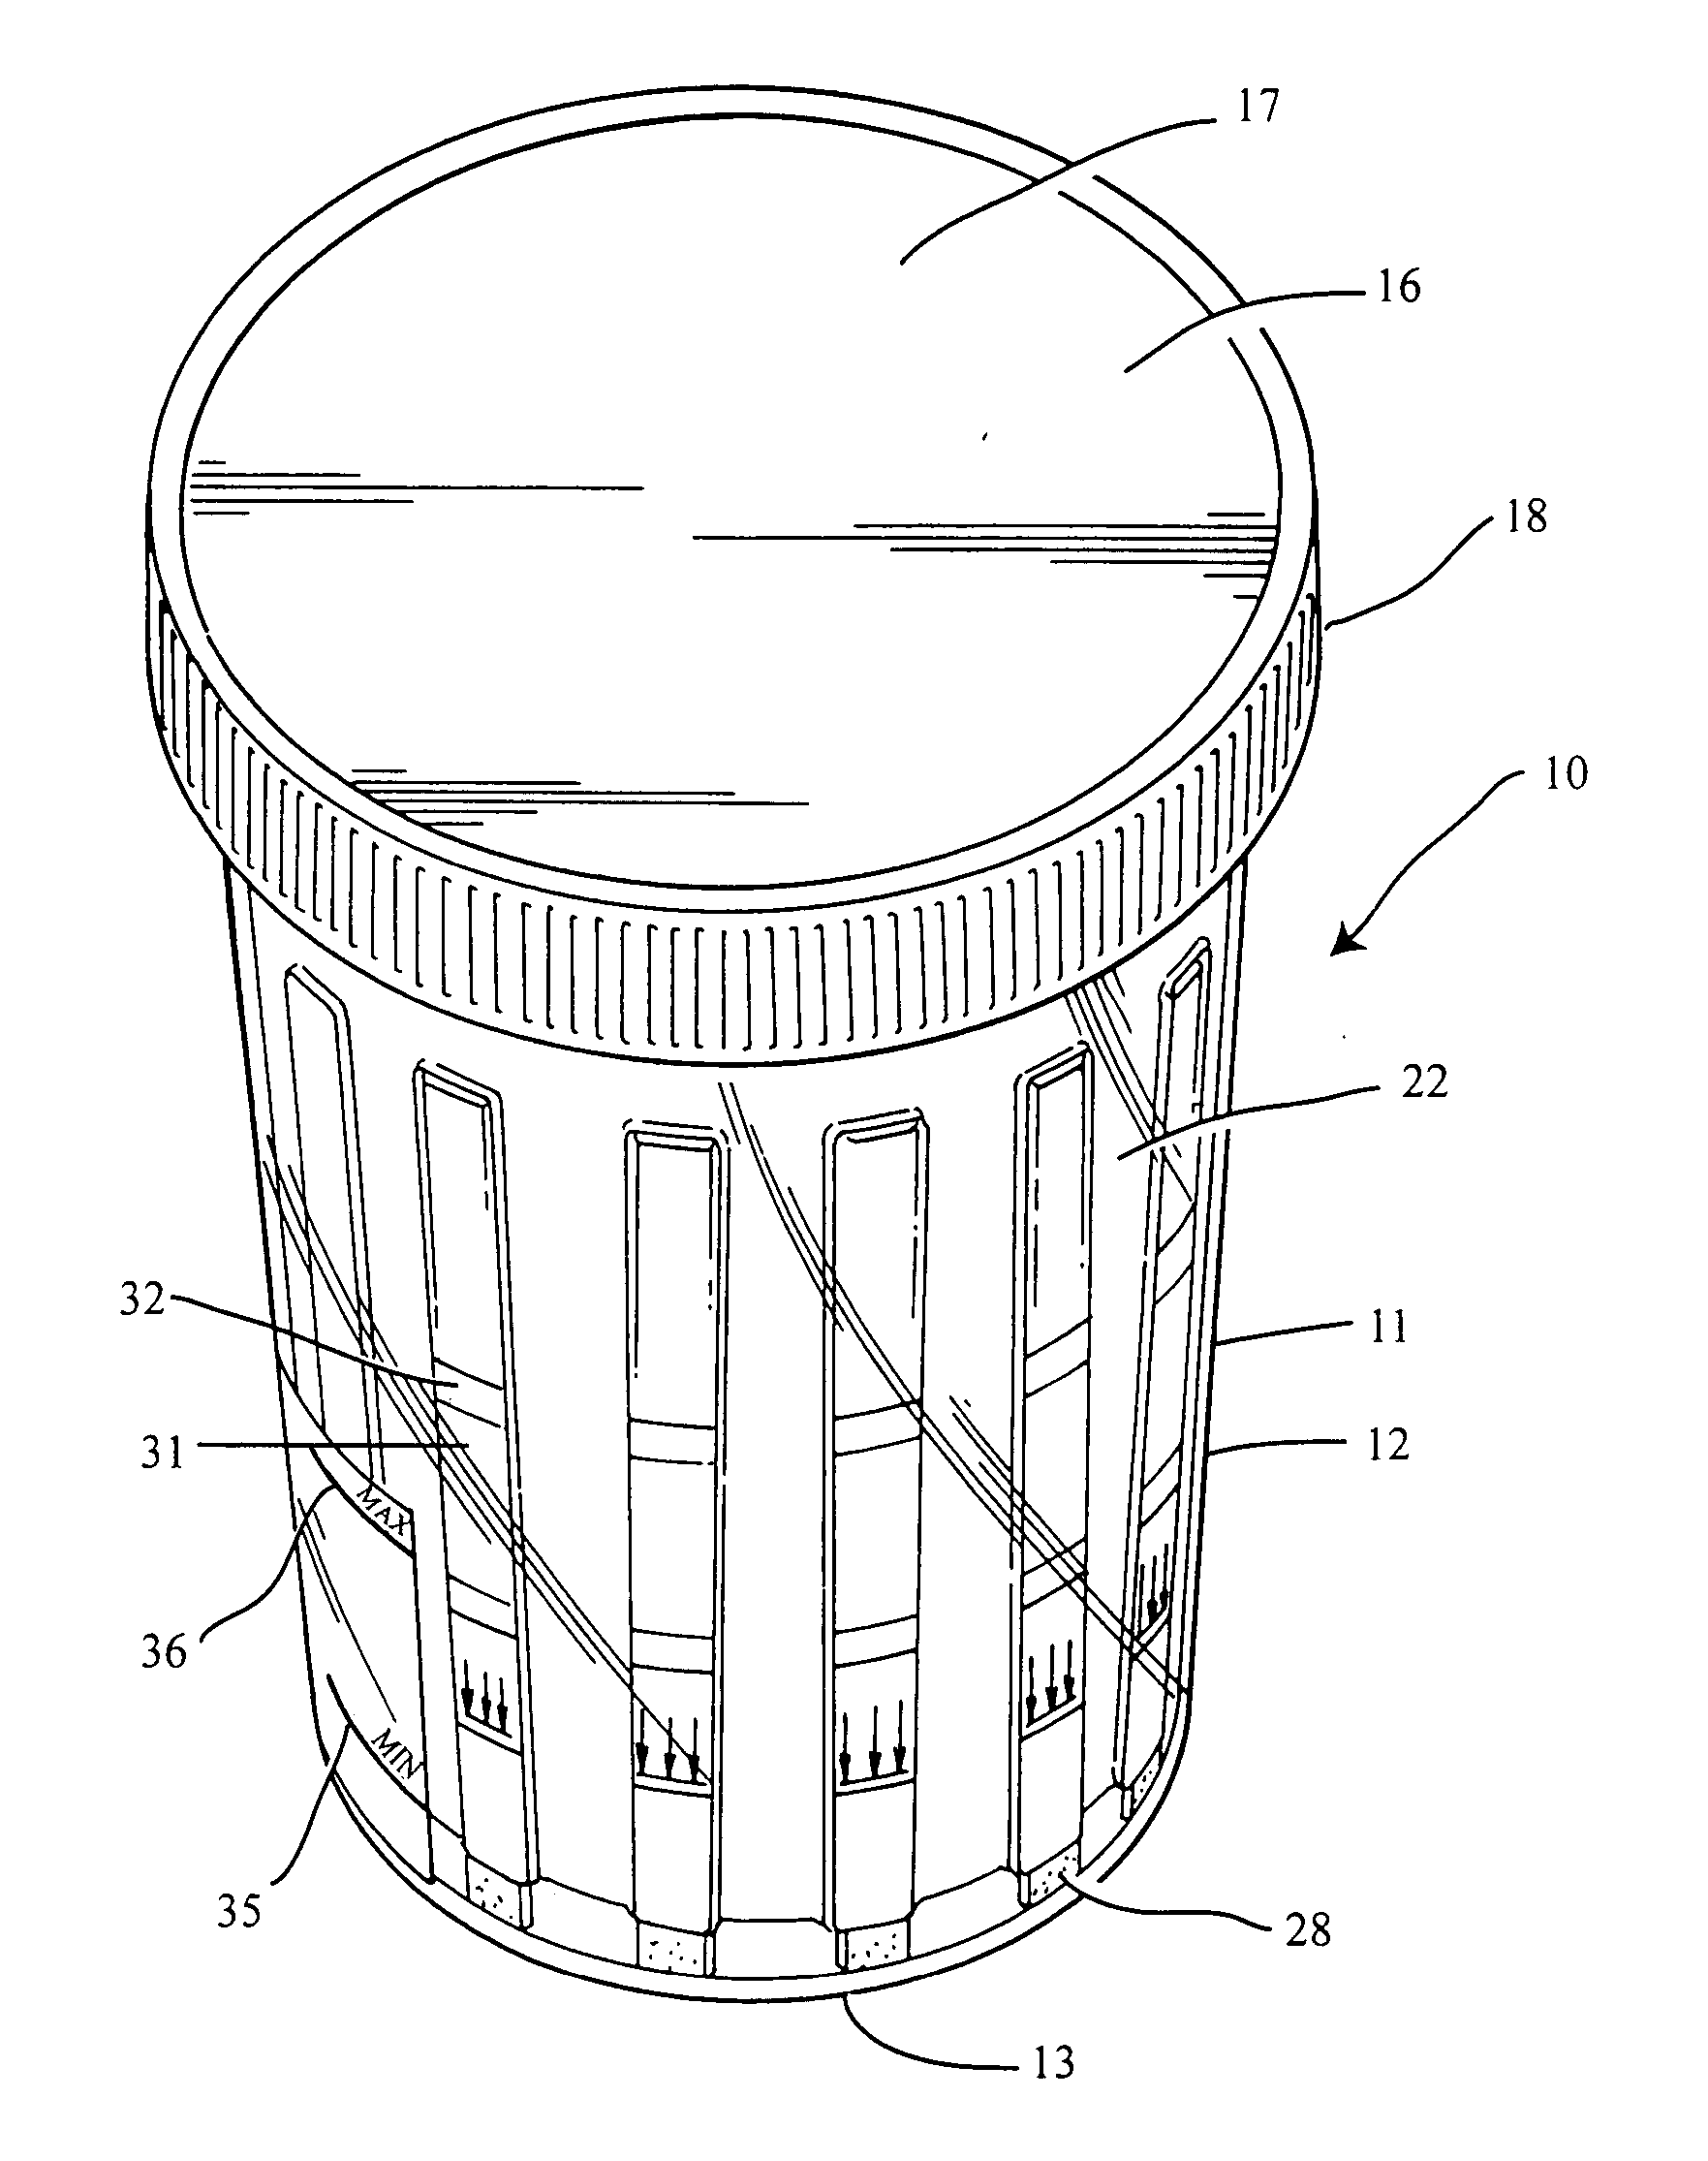 Assay device and process for the testing of fluid samples